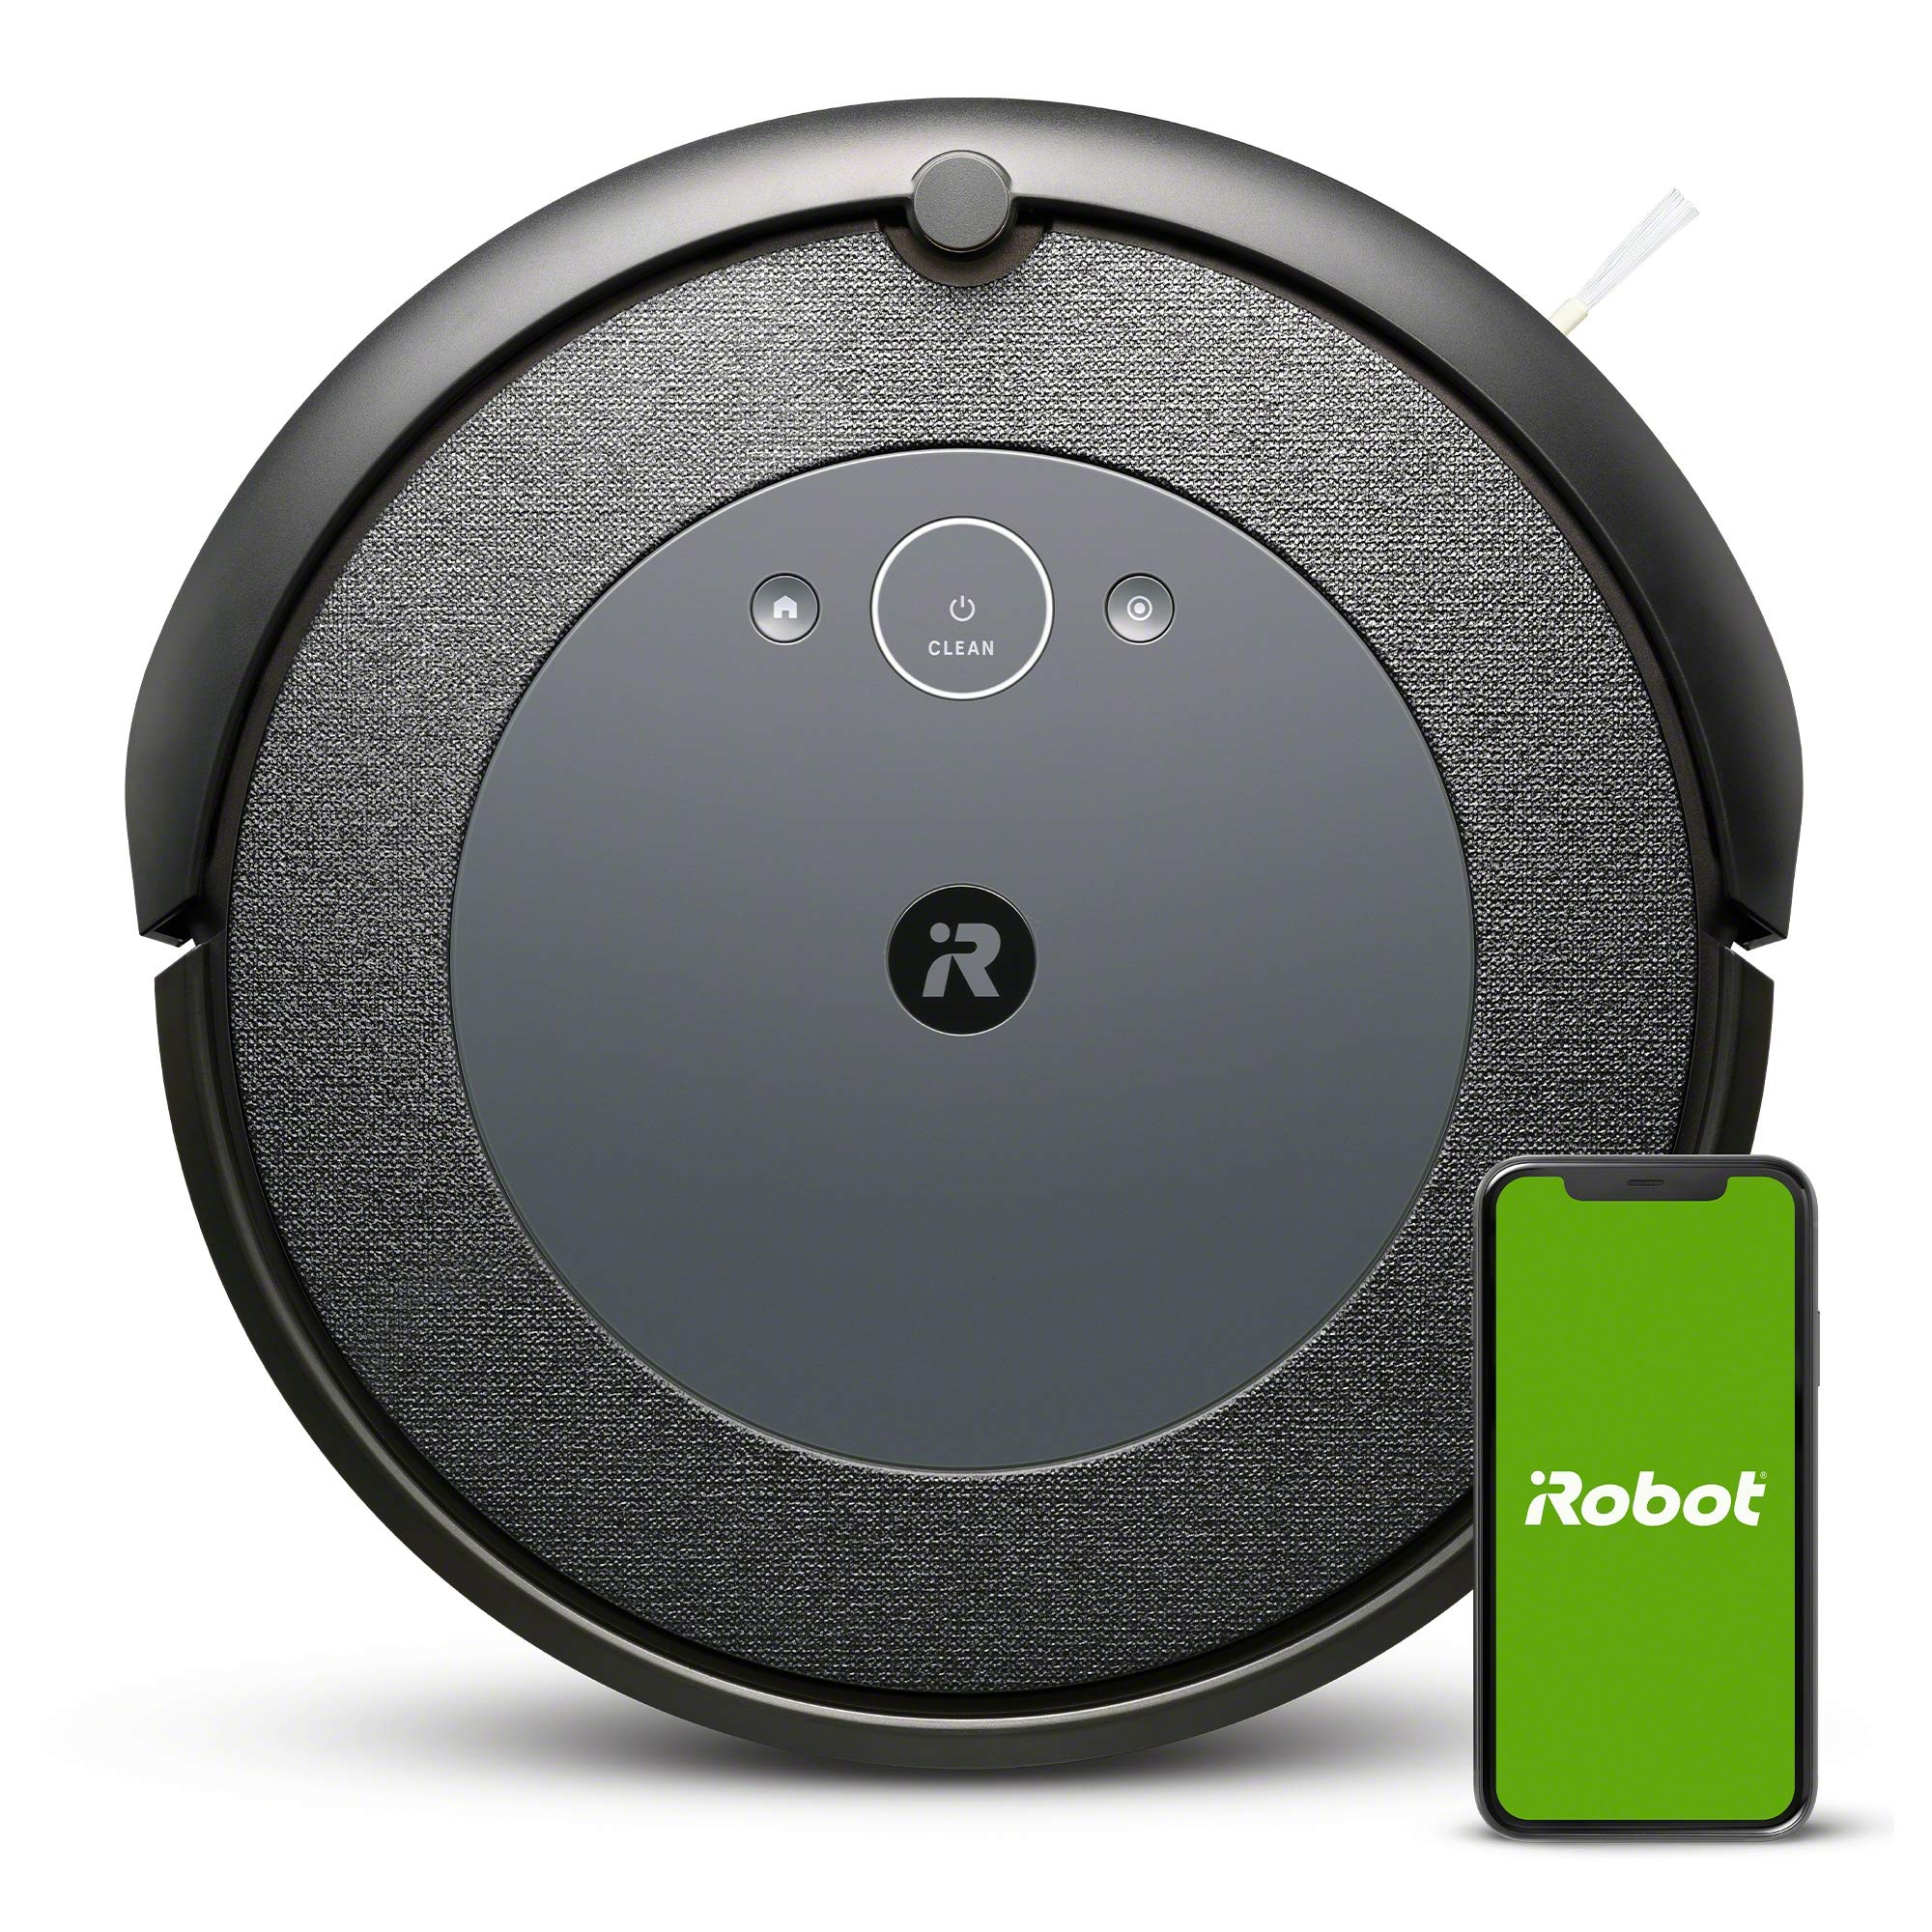 Irobot Roomba I3 Connected Mapping Robot Vacuum With Dual Multi Surface Rubber Brushes Ideal For Pets Voice Assistant And Imprint Link Compatibility 2 Year Warranty On 1 Battery, I315840